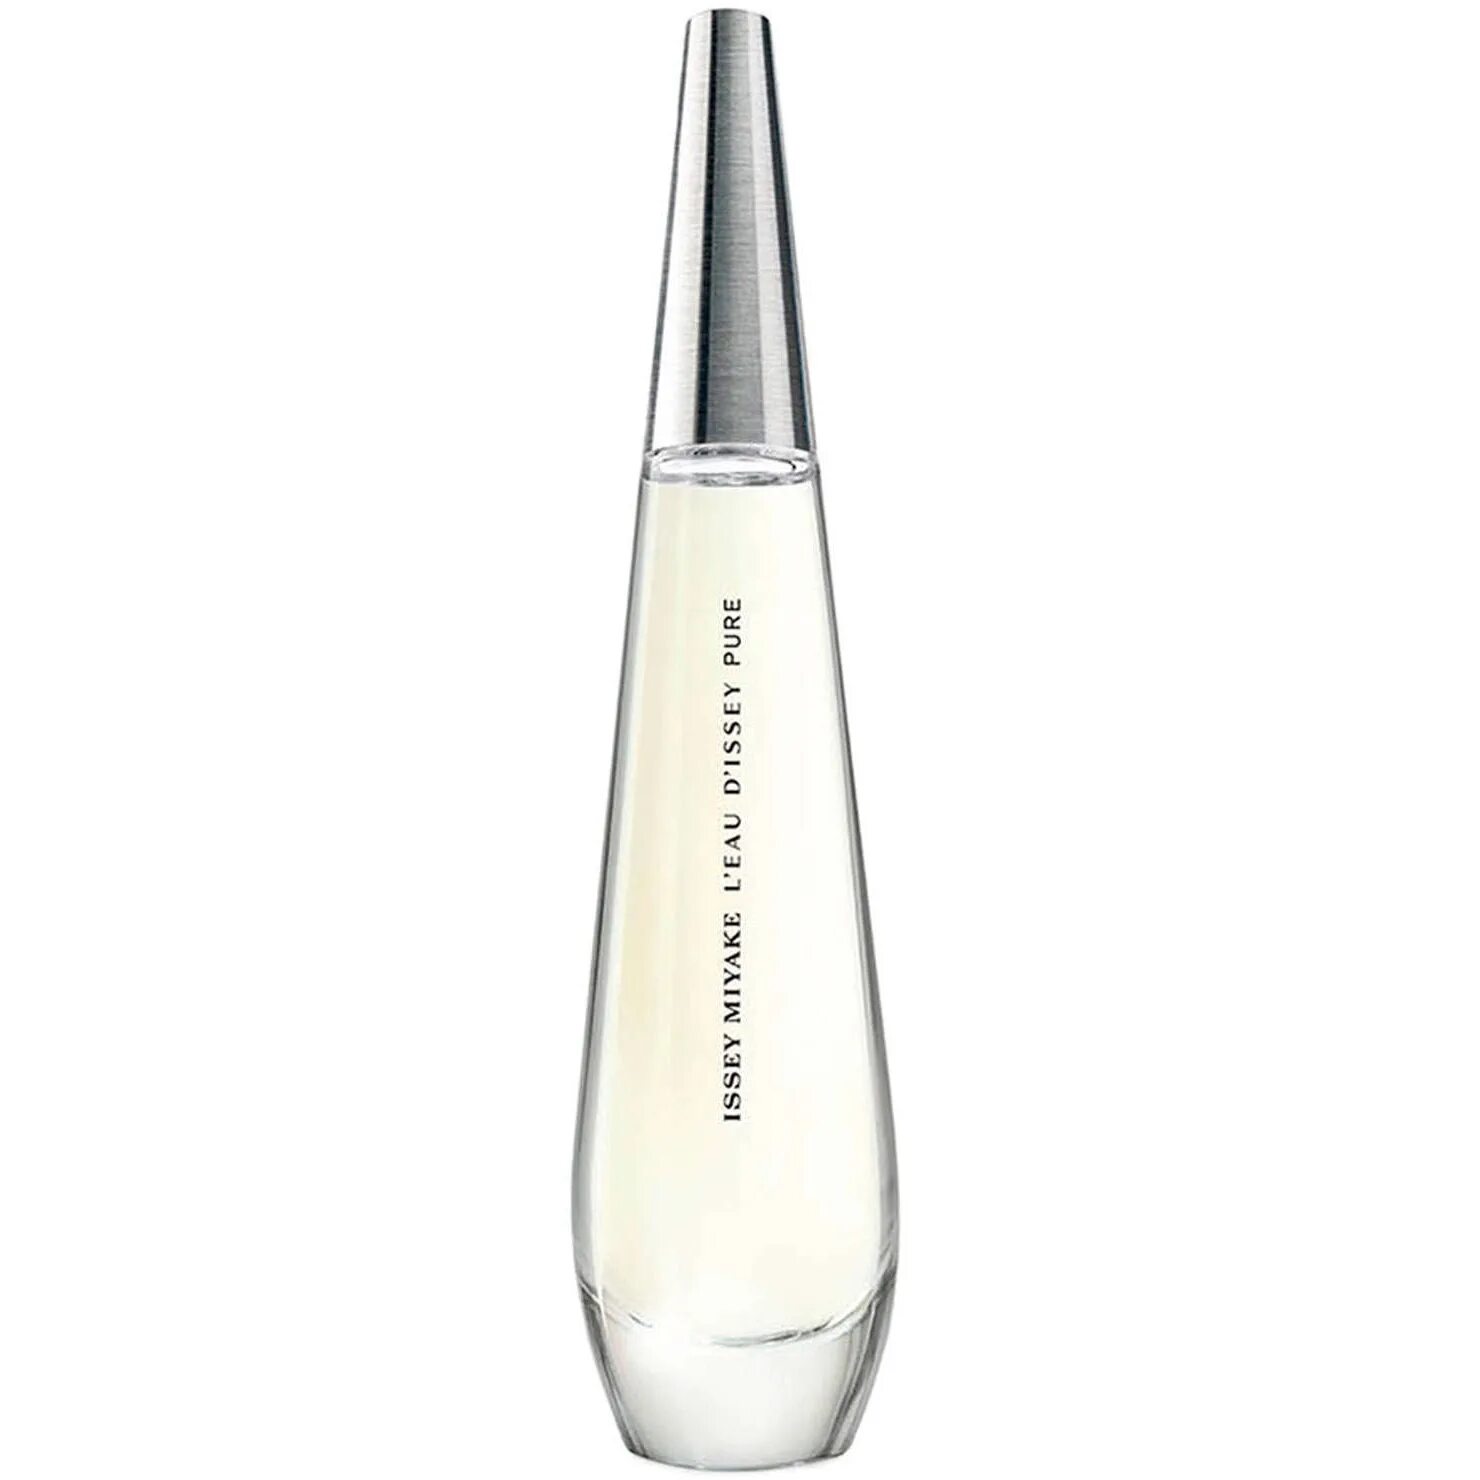 Issey Miyake l'Eau d'Issey Pure 90 мл. Issey Miyake l'Eau d'Issey 100 ml. Issey Miyake l`Eau d`Issey. Issey Miyake l'Eau d'Issey Pure.